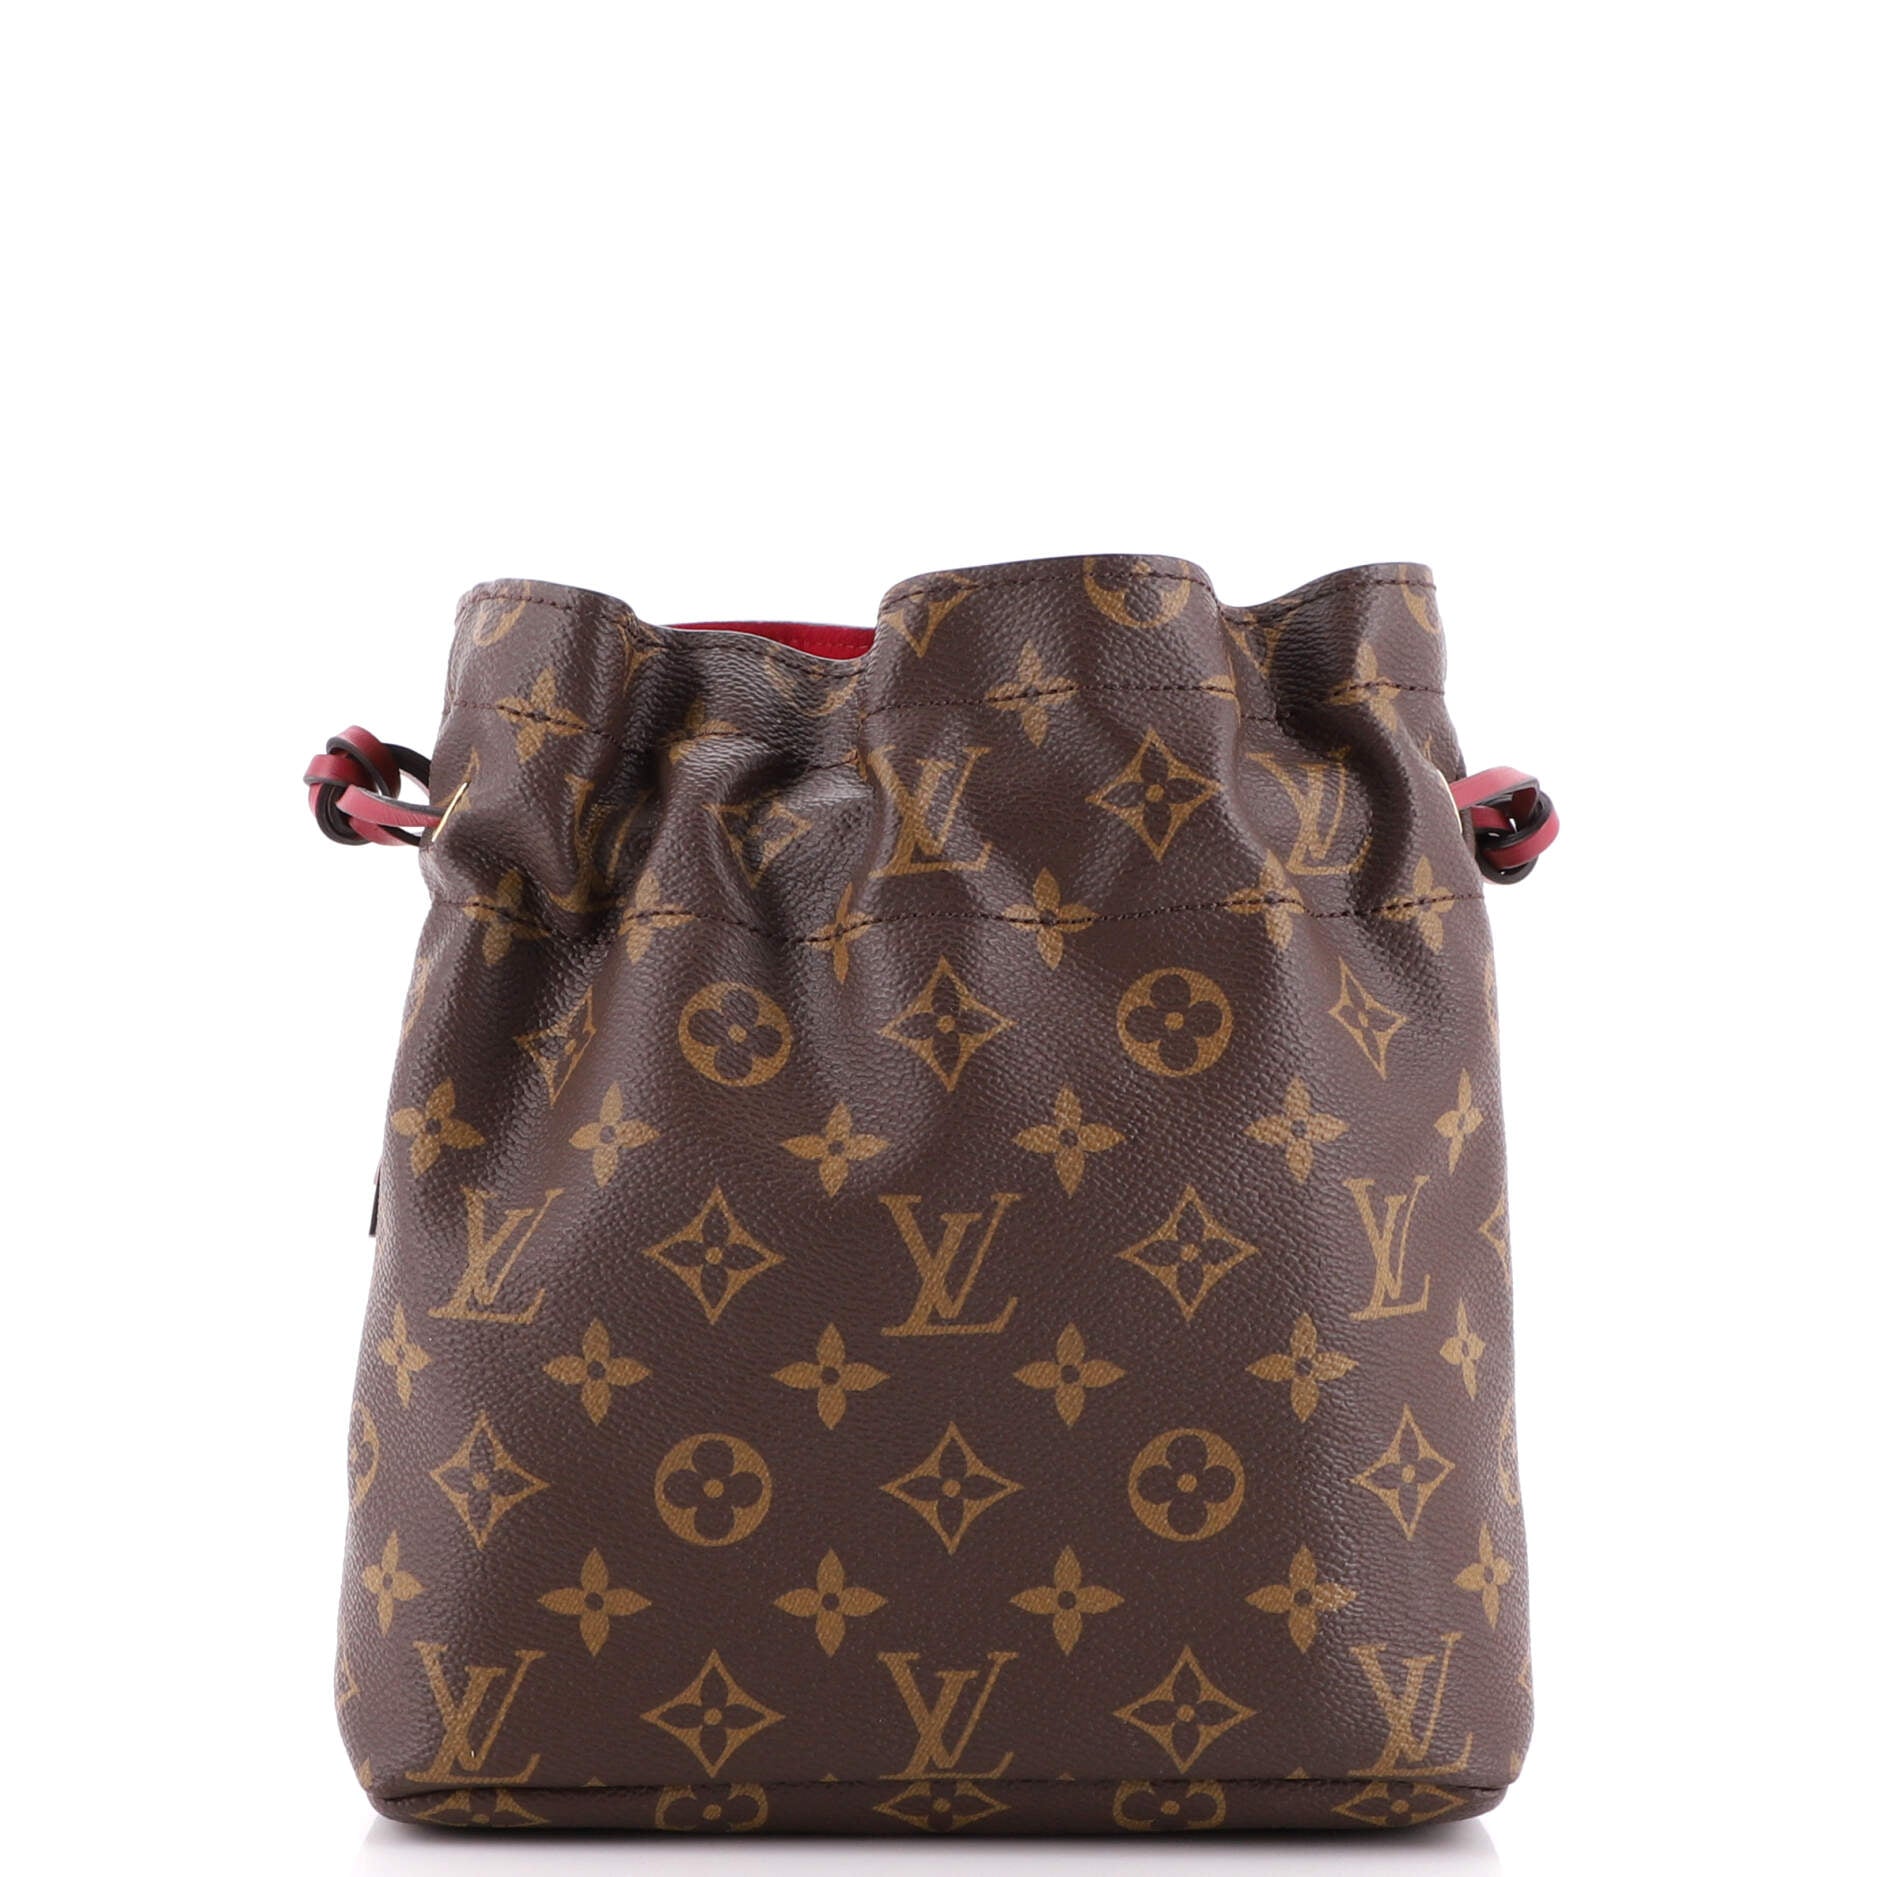 Louis Vuitton Drawstring Backpack Limited Edition 2054 Monogram Textile